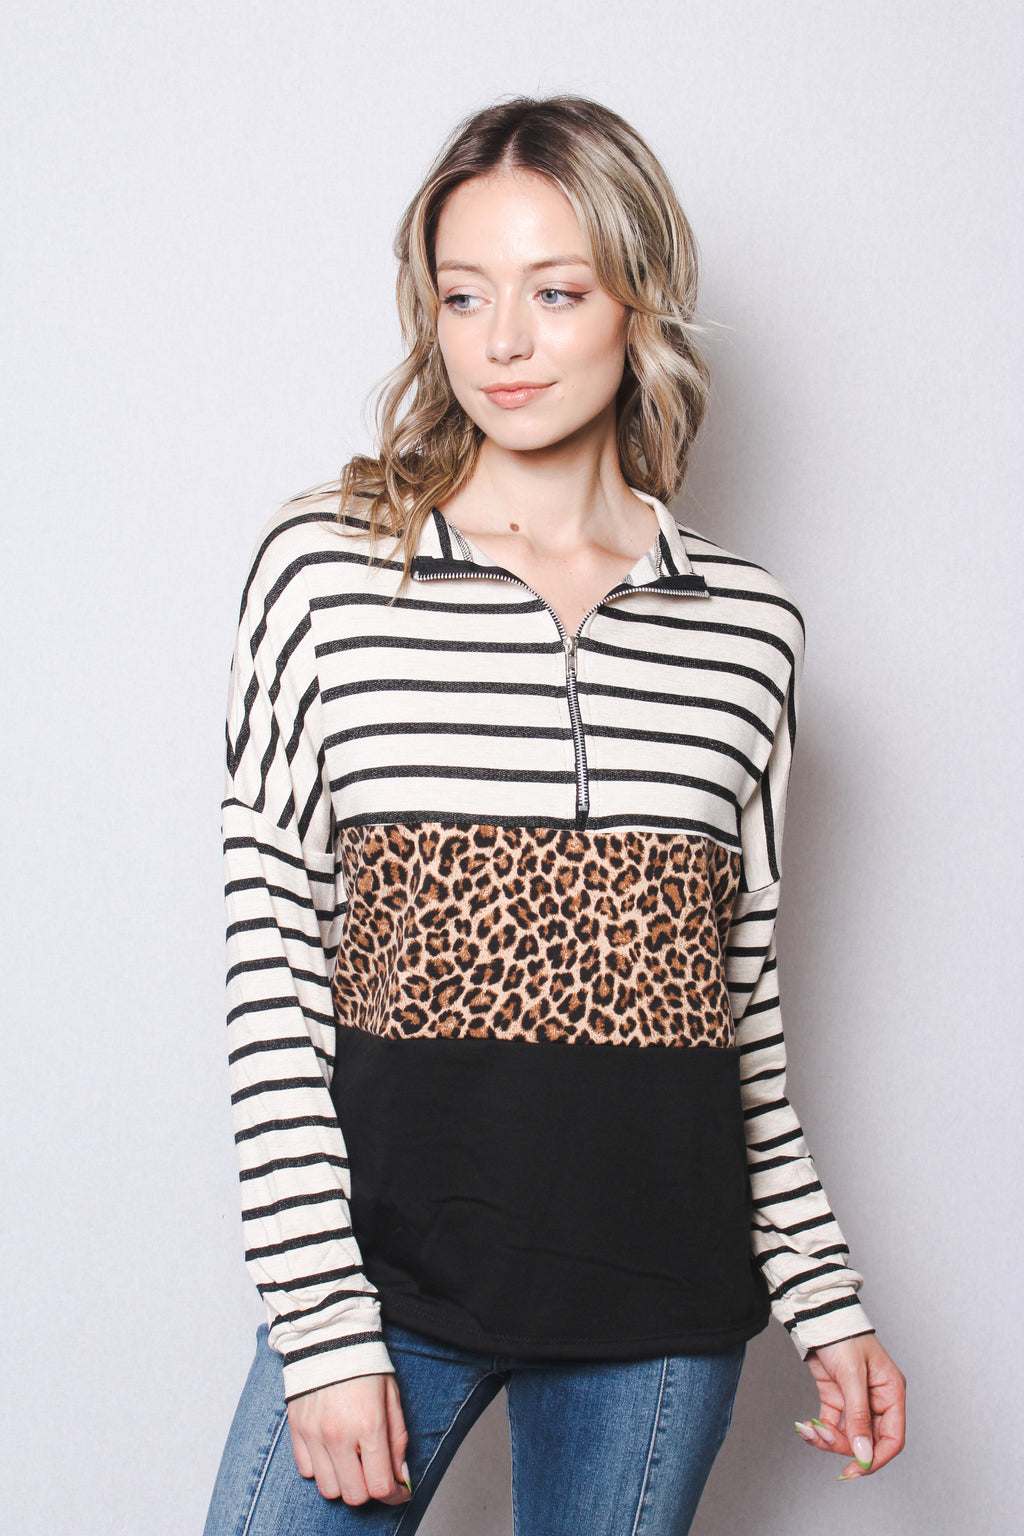 Women's Zipped Up Long Sleeves Animal Print Striped Color Block Top